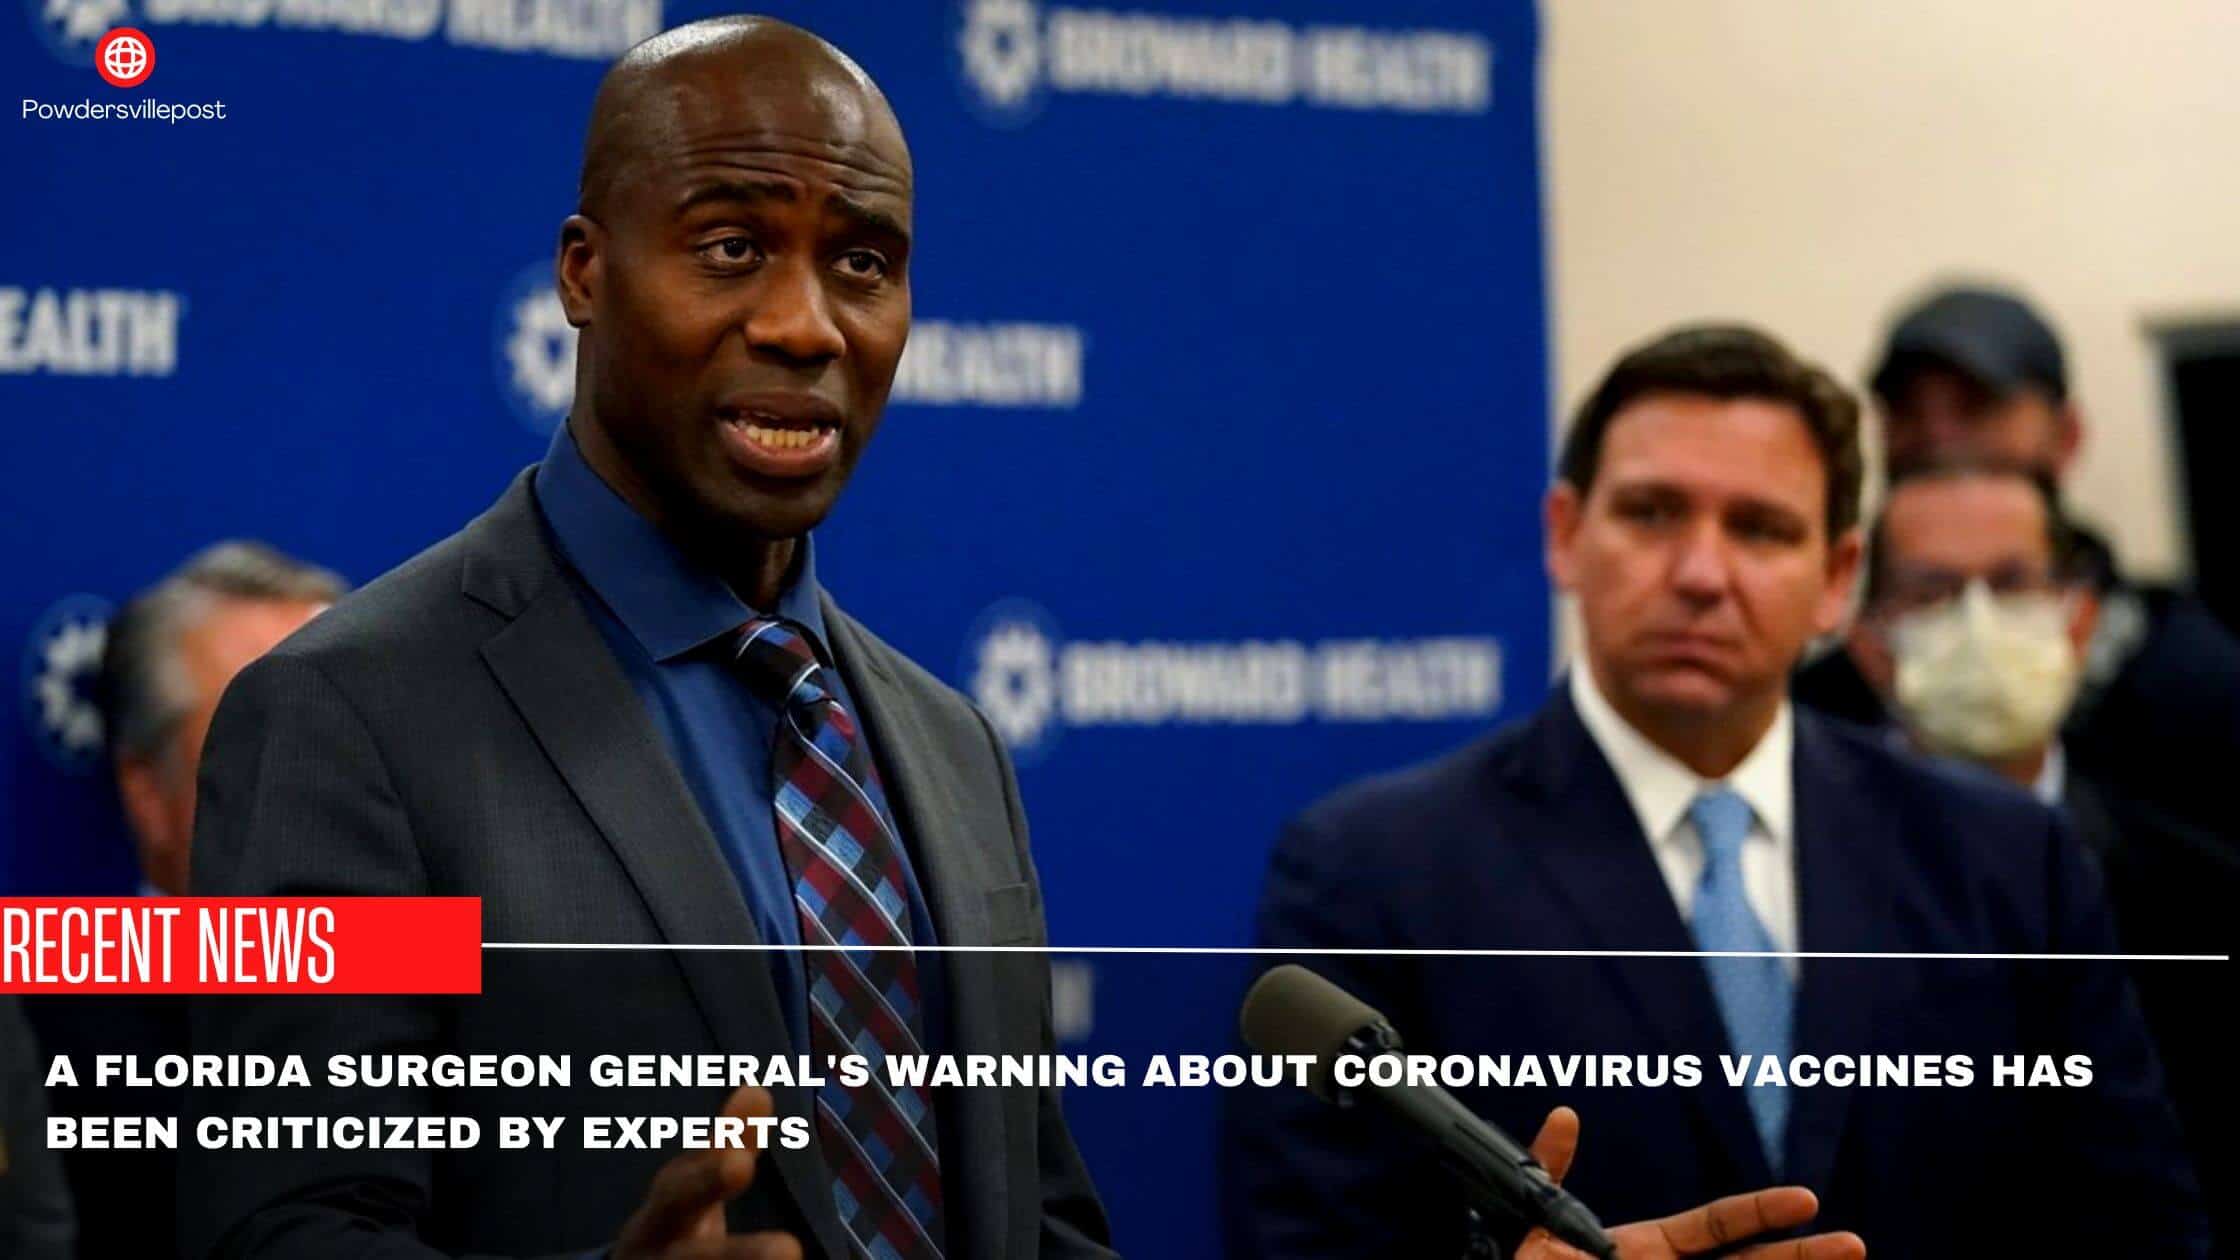 A Florida Surgeon General's Warning About Coronavirus Vaccines Has Been Criticized By Experts